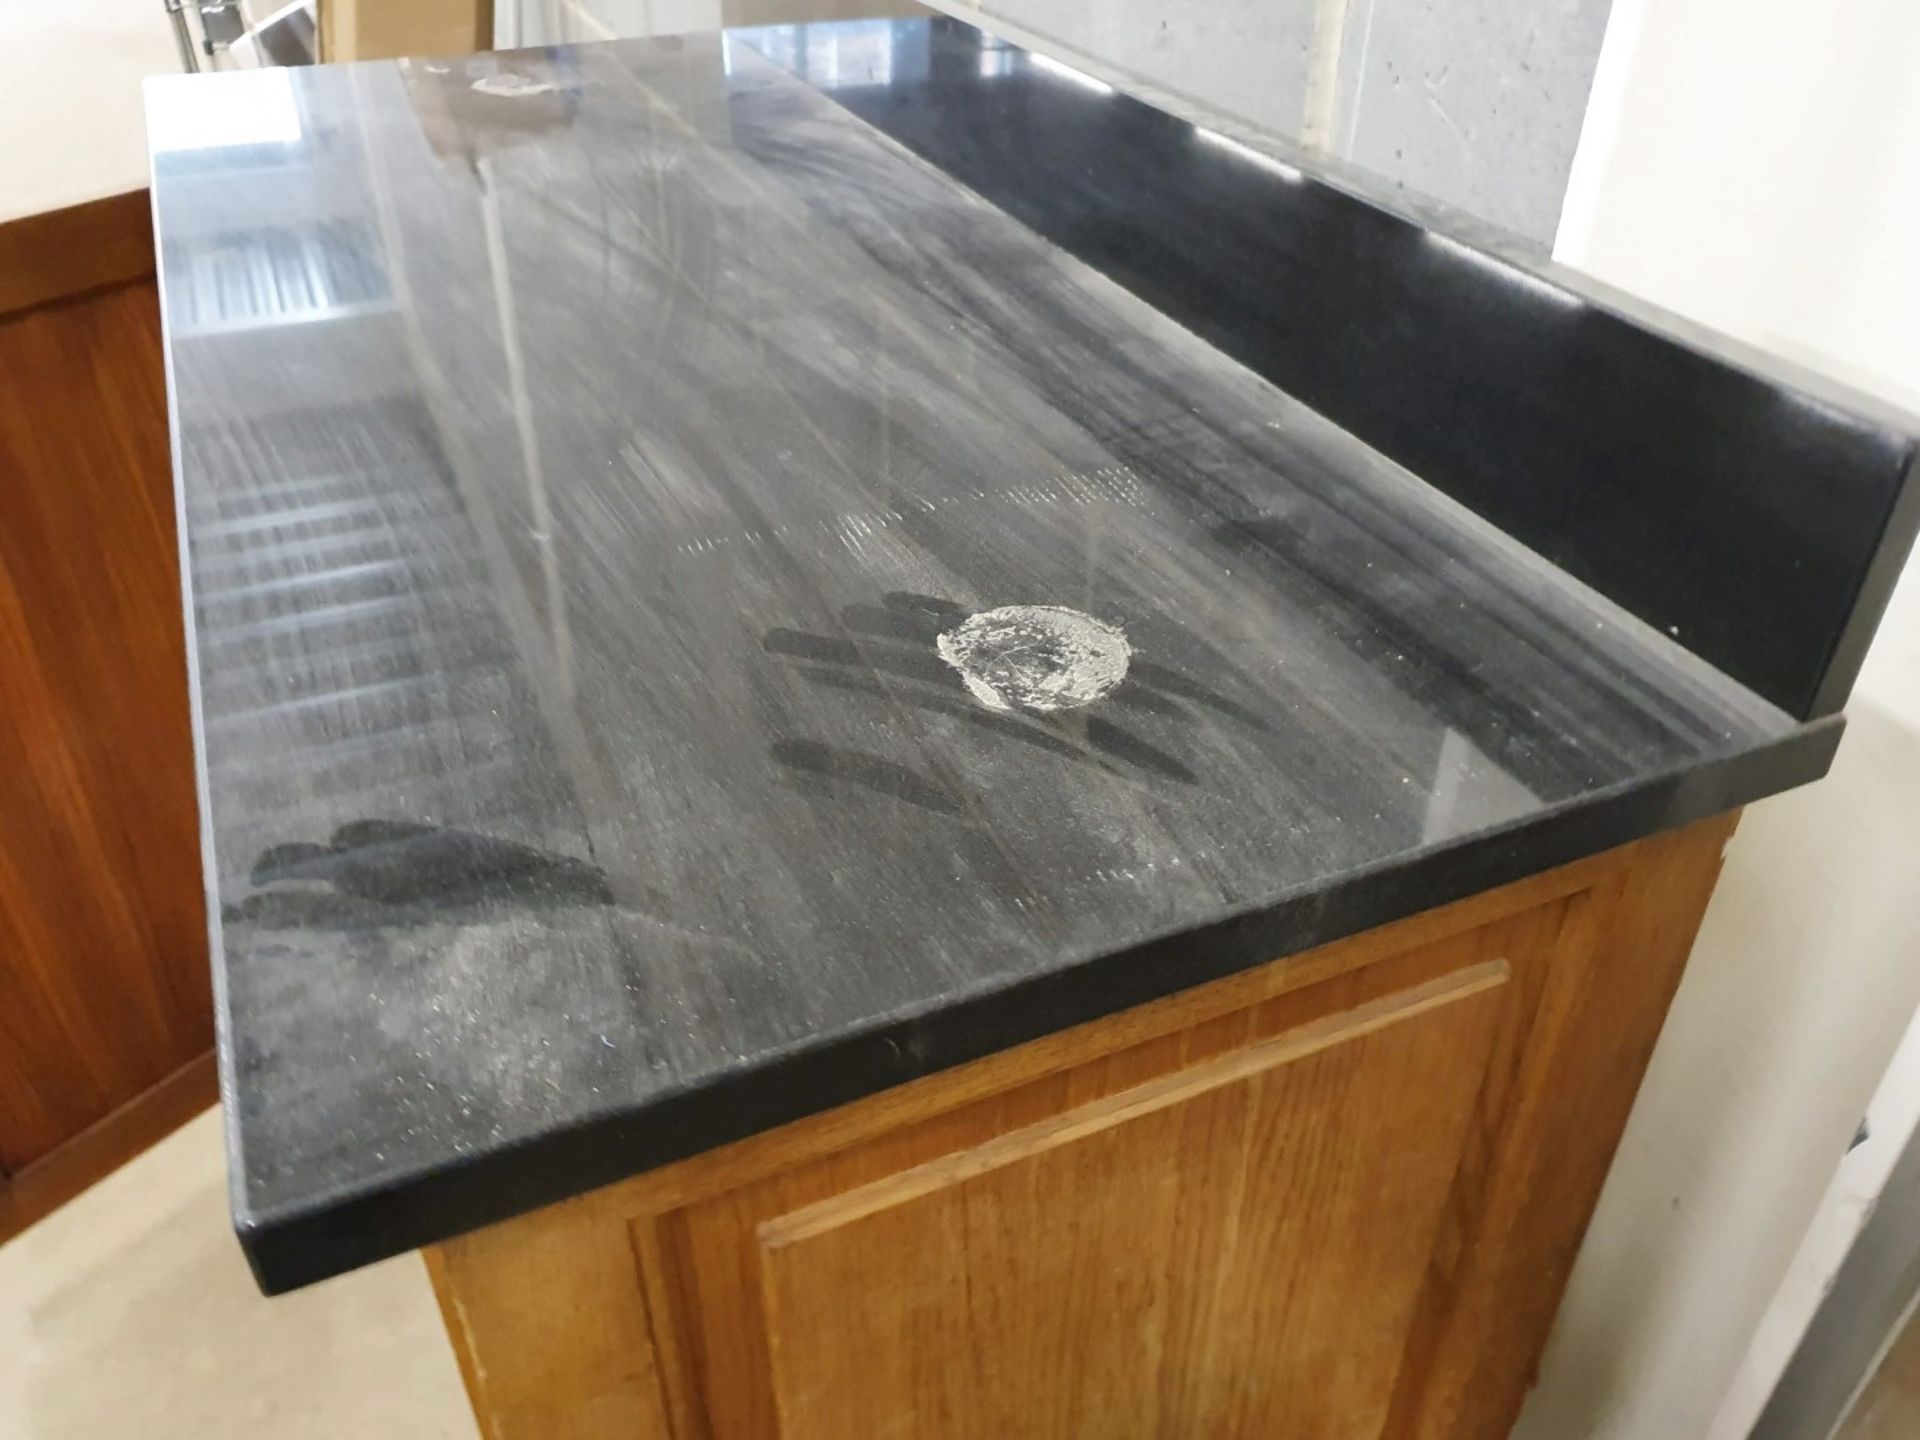 1 x Waitress / Waiter Service Counter With Granite Worktop - H105 x W120 x D51 cms - Ref PA213 - - Image 5 of 5